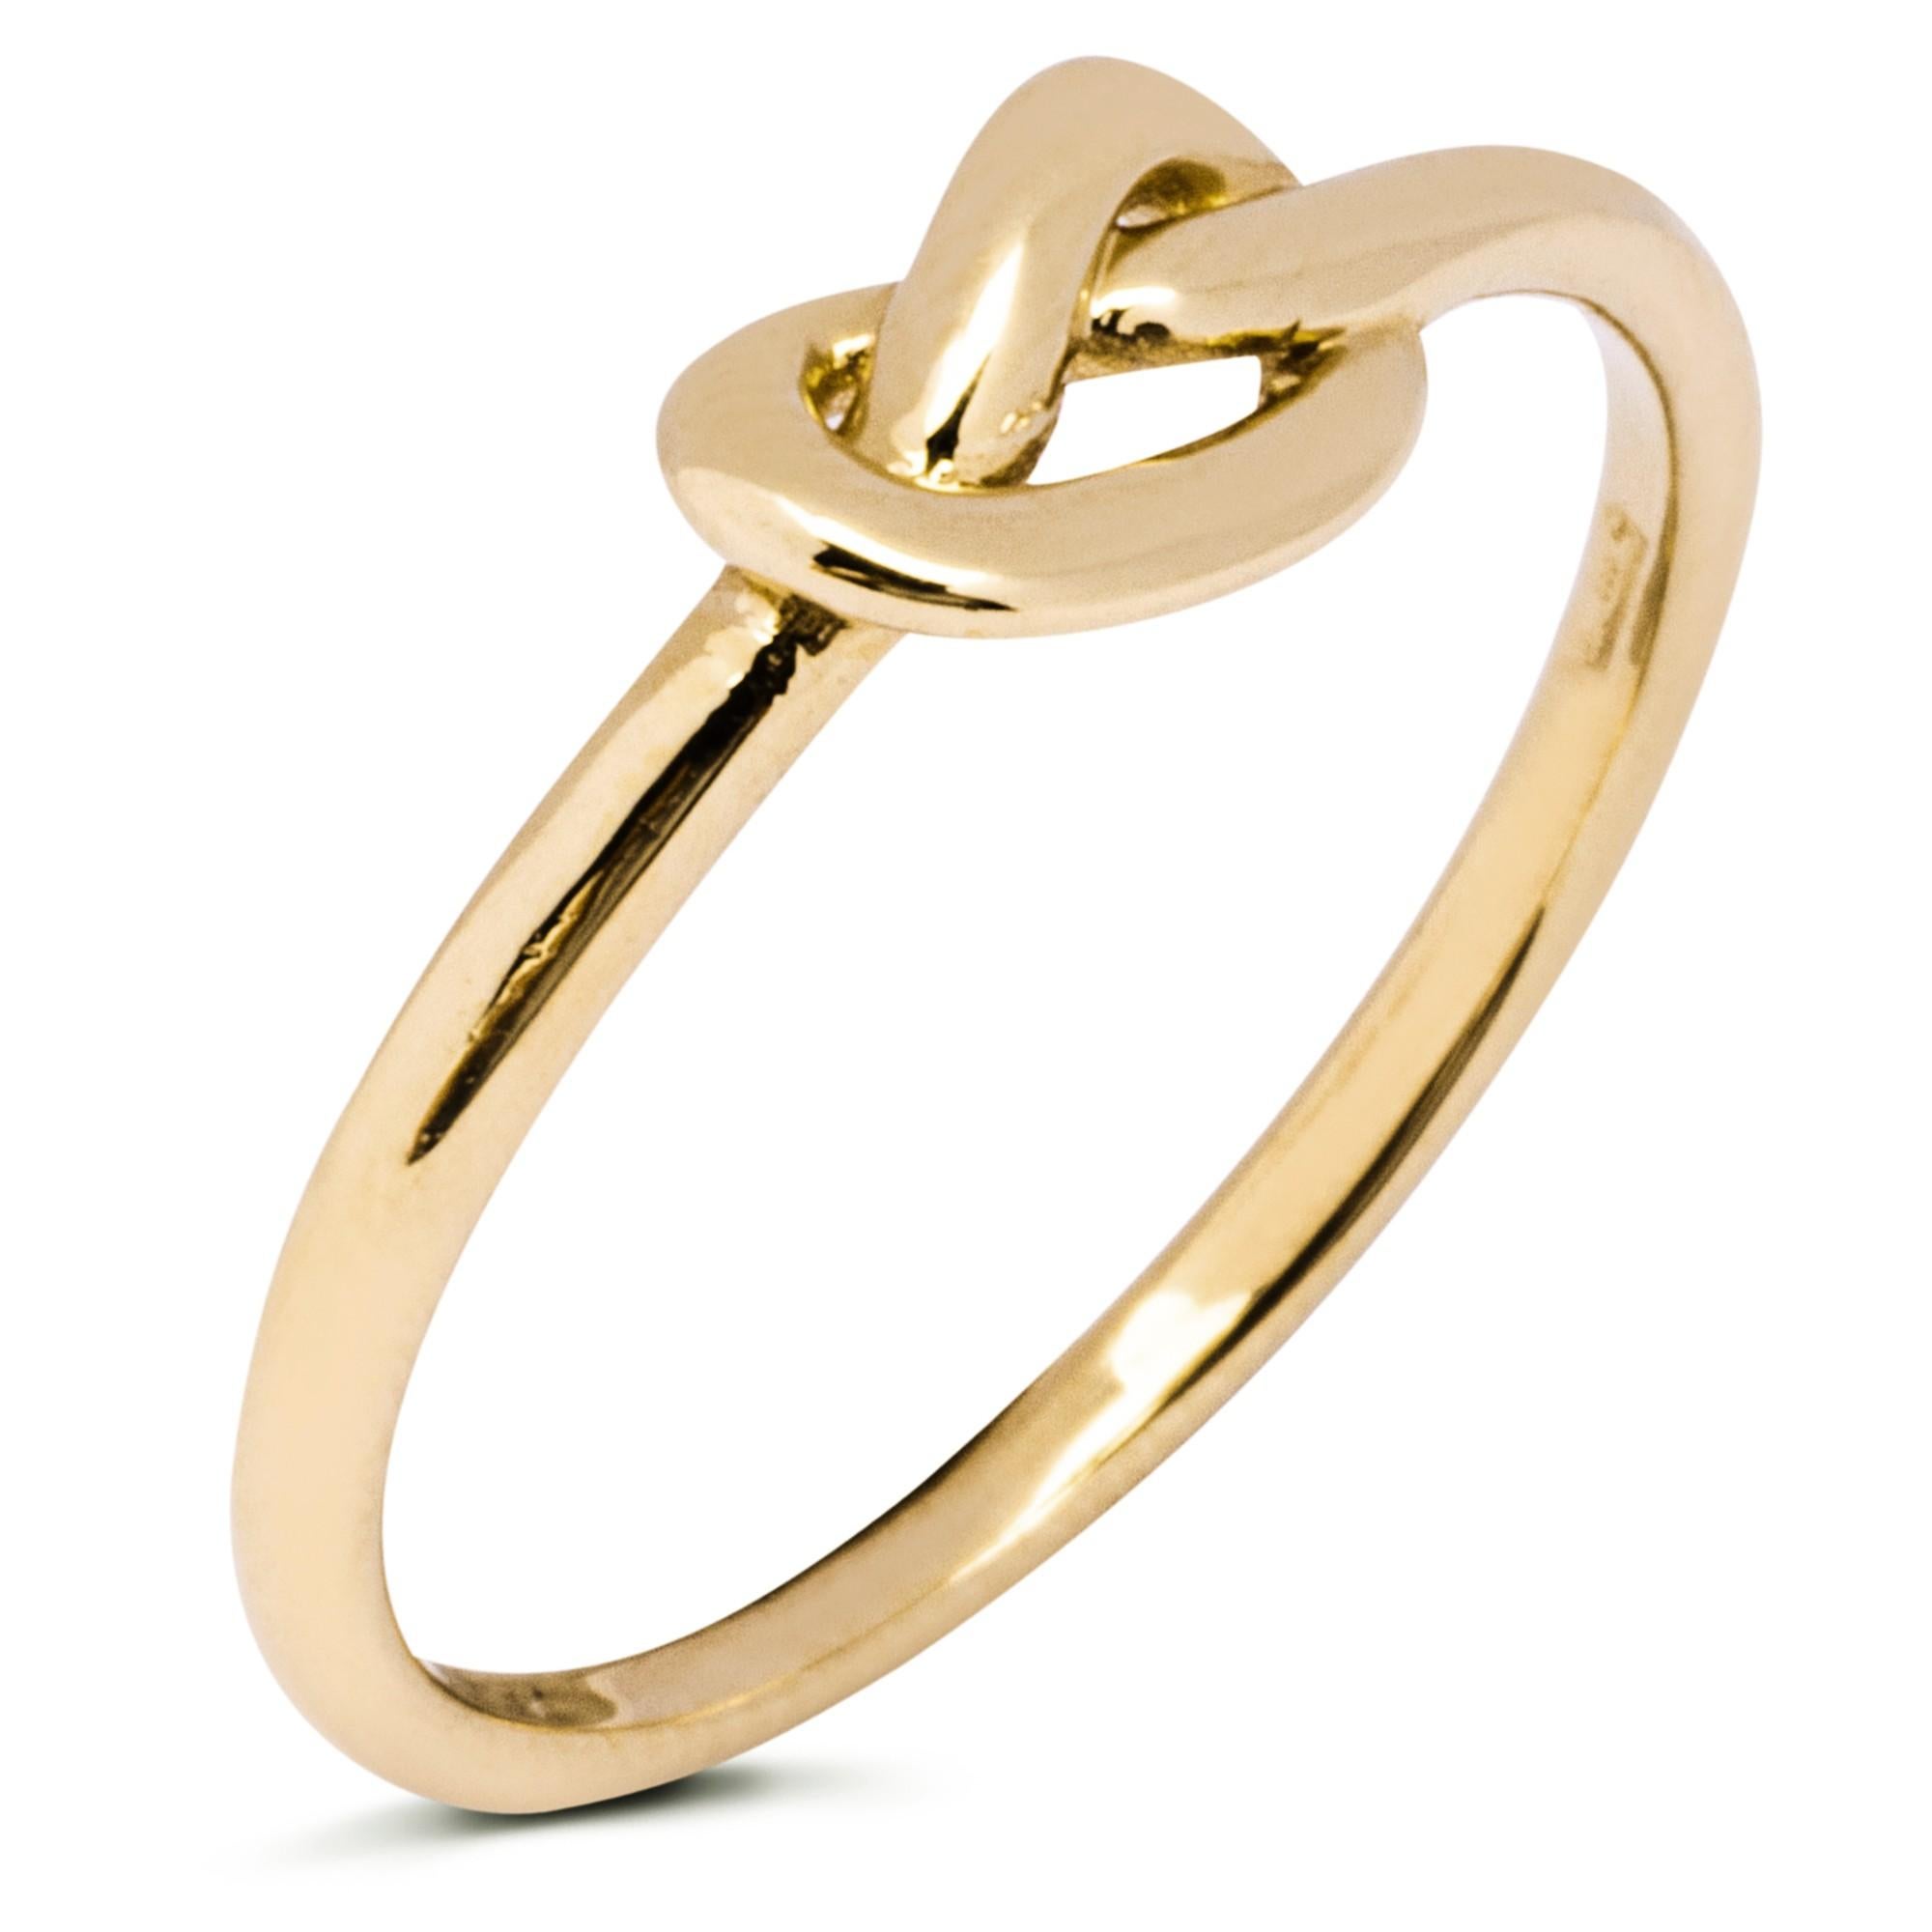 Alex Jona design collection, hand crafted in Italy, 18 Karat yellow gold little love knot ring.

Alex Jona jewels stand out, not only for their special design and for the excellent quality of the gemstones, but also for the careful attention given